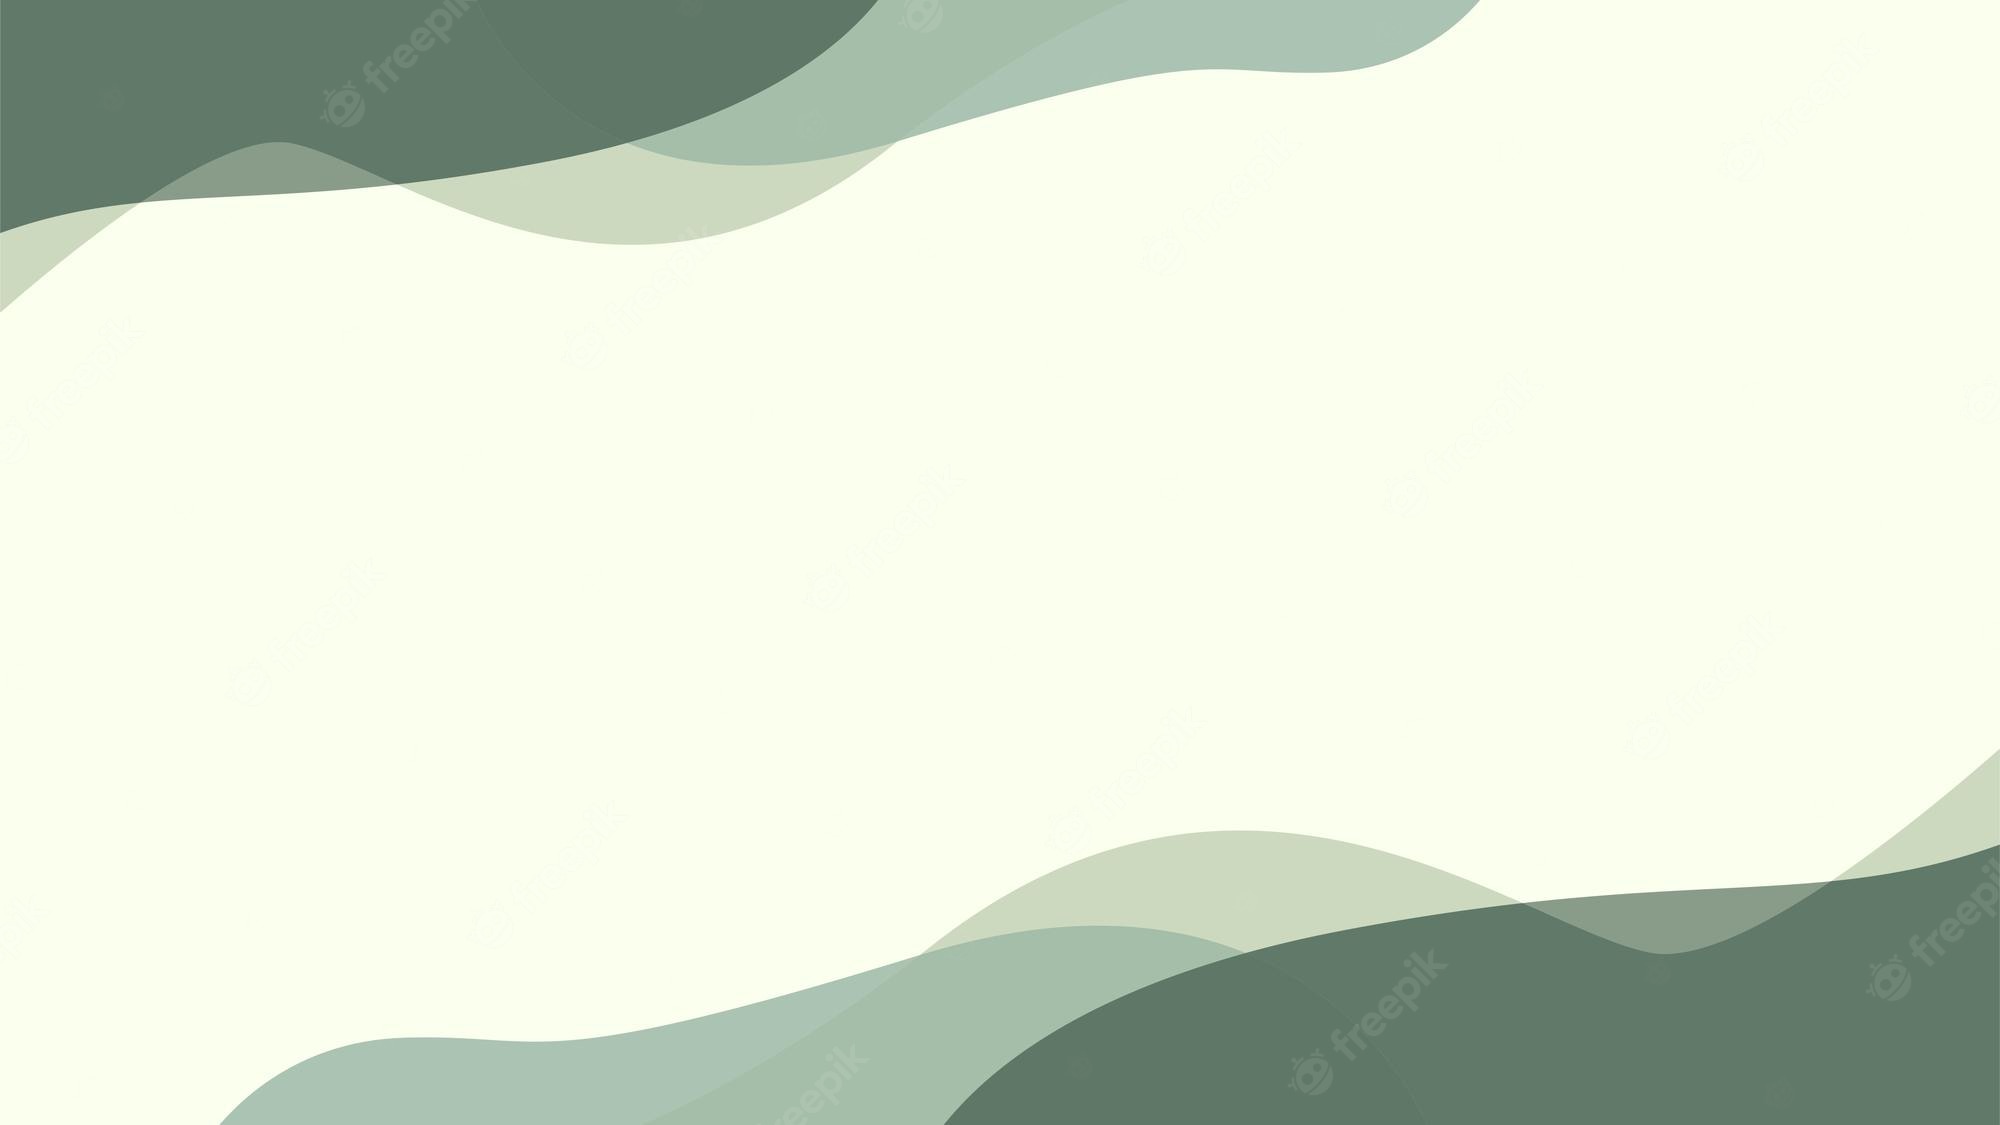 A green and white wave background - Sage green